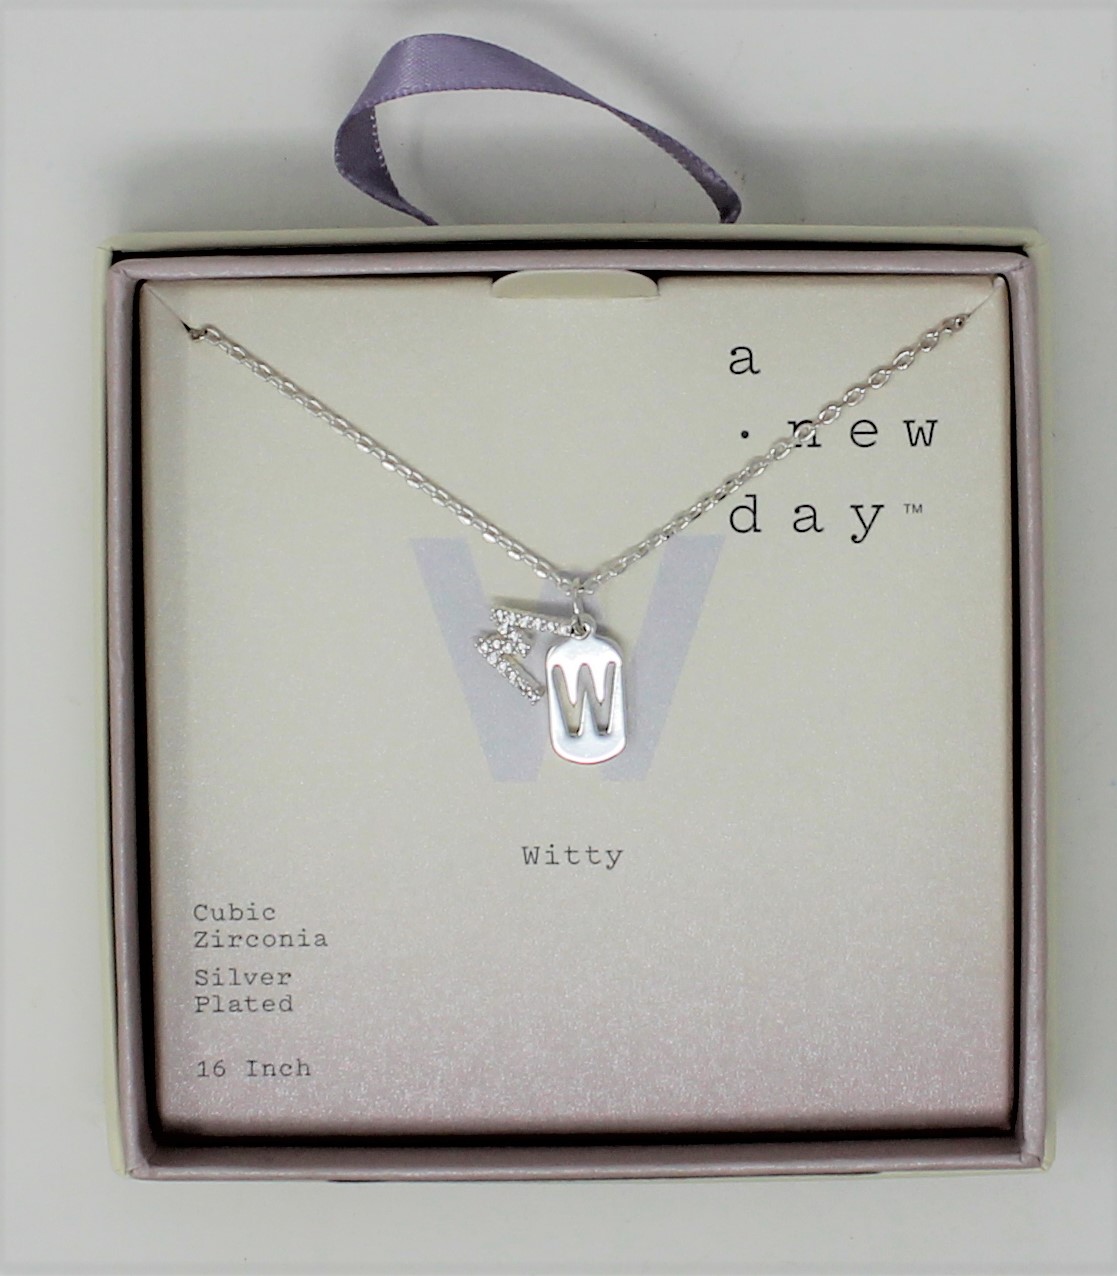 "WITTY" CUBIC ZIRCONIA SILVER PLATED 16 INCH NECKLACE